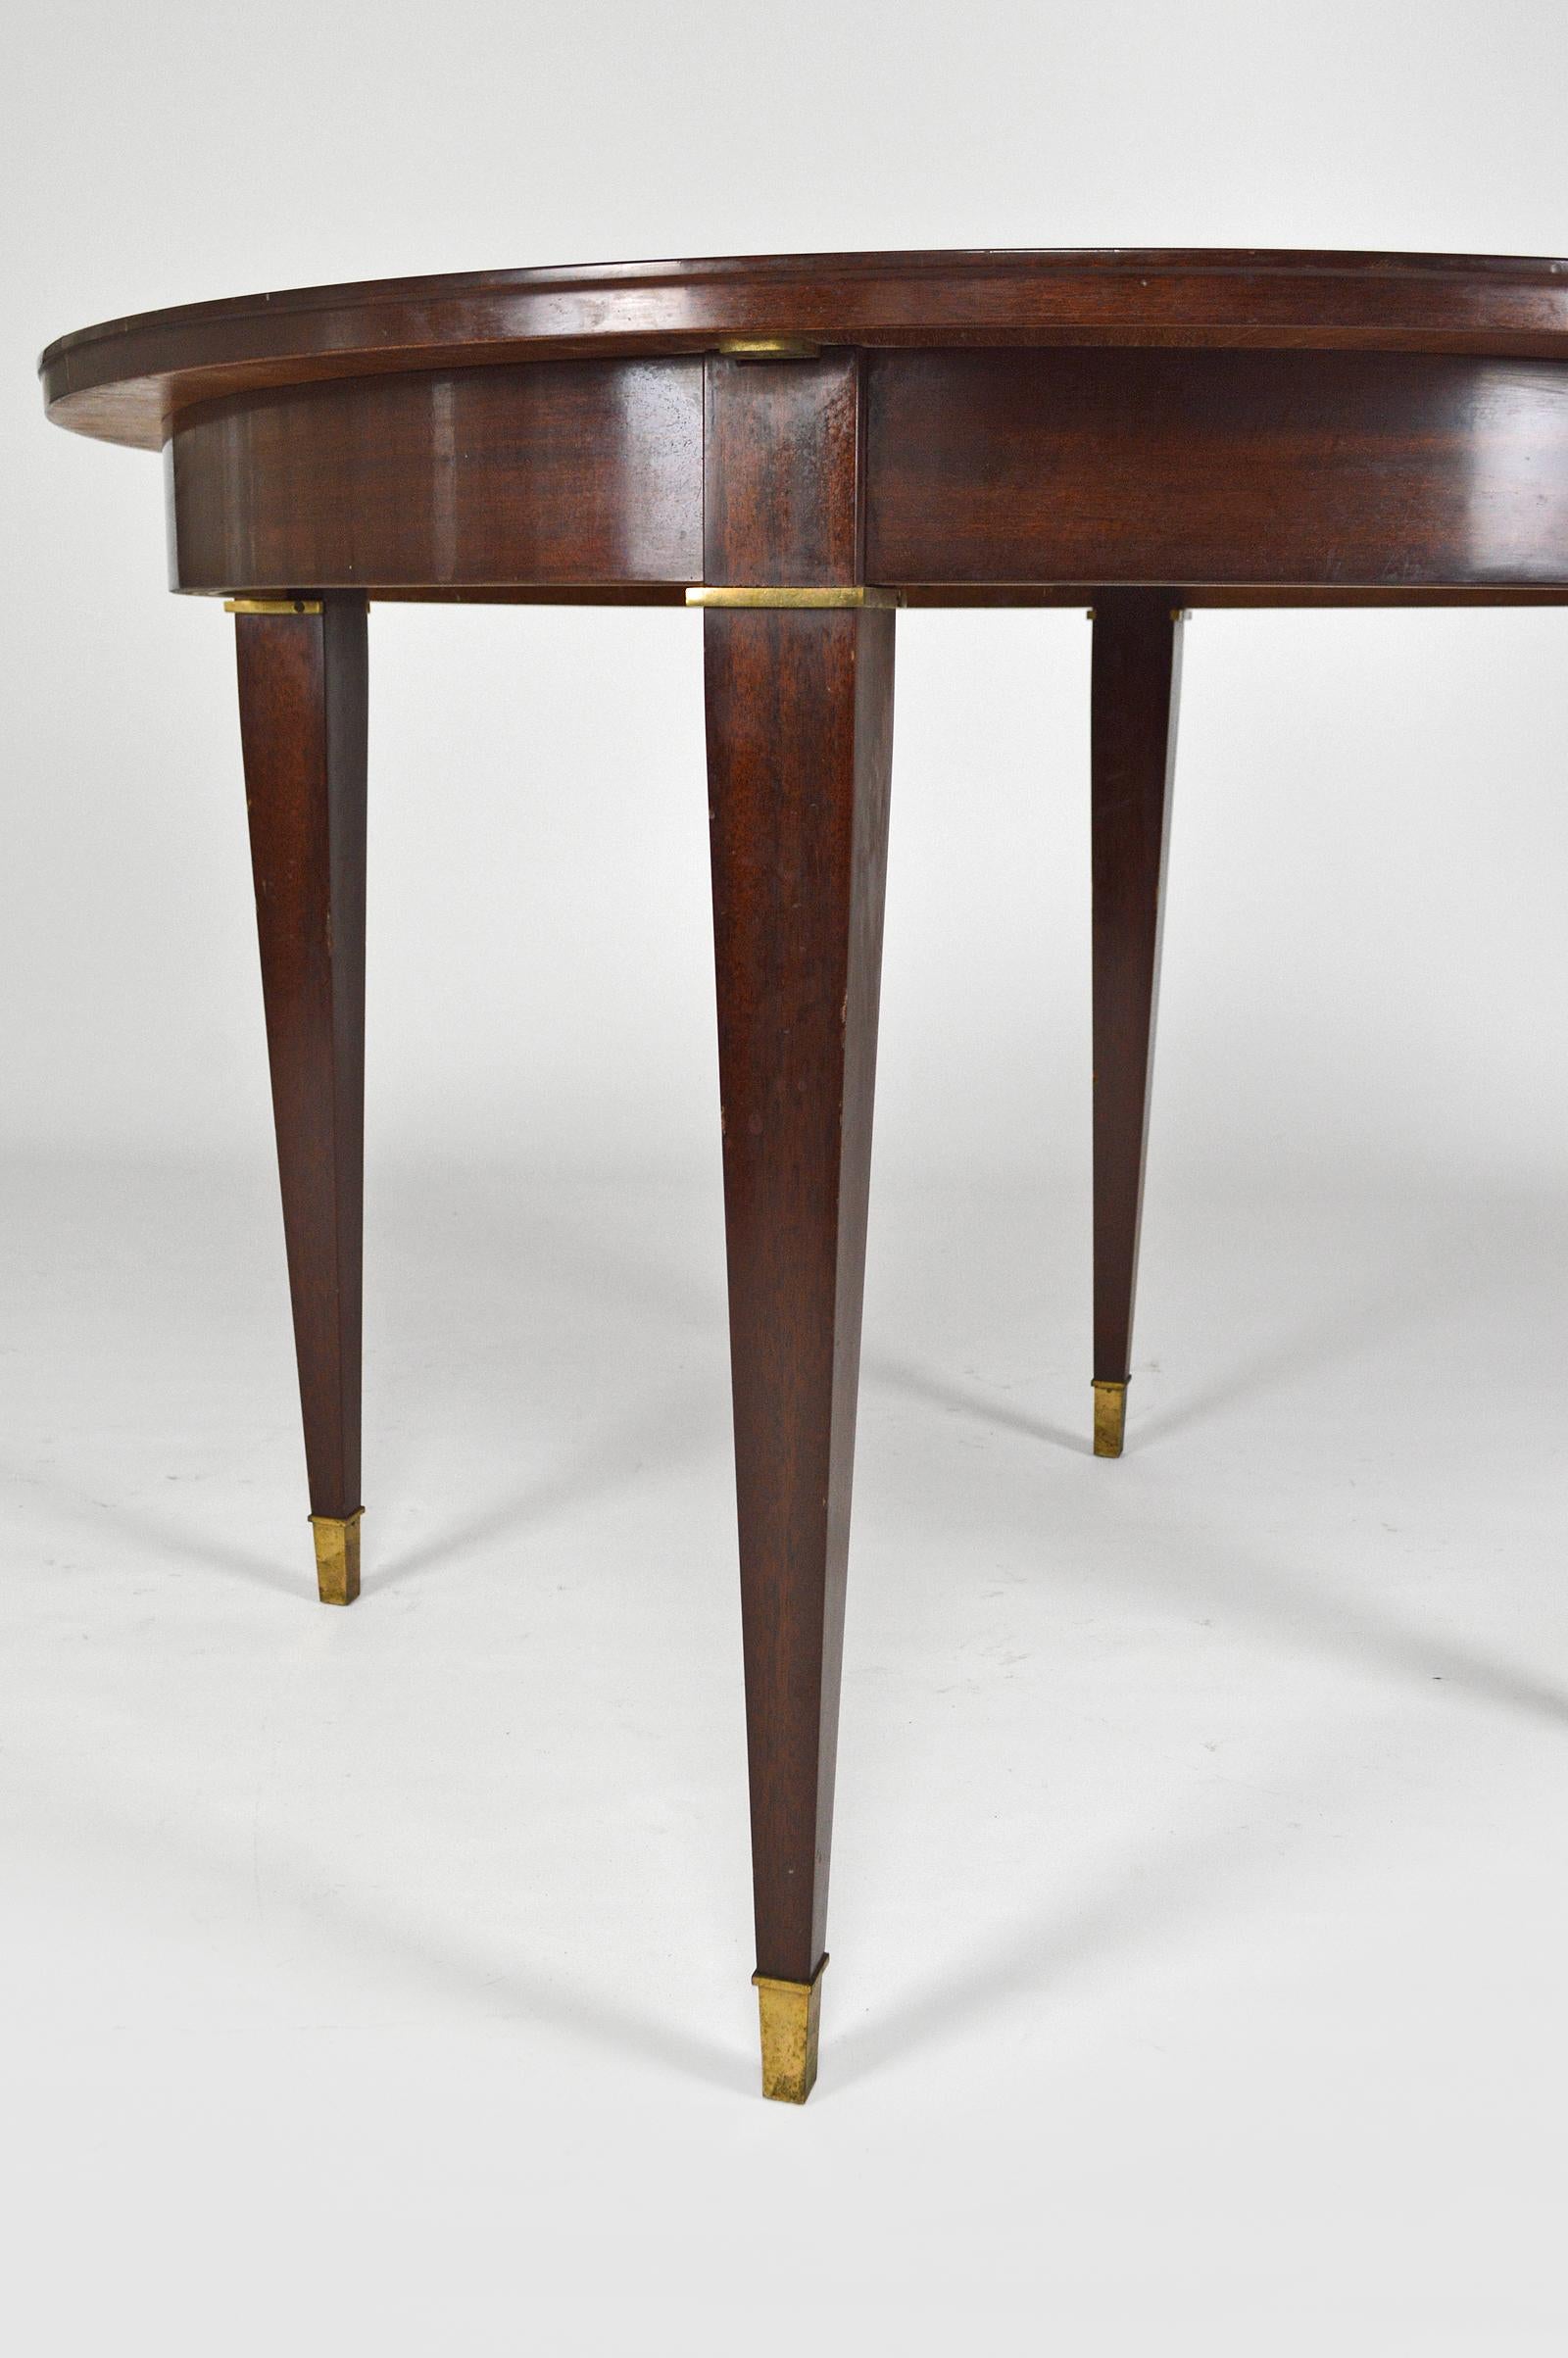 Veneer Art Deco Mahogany Round Table with Extensions, by Jacques Adnet, circa 1940 For Sale